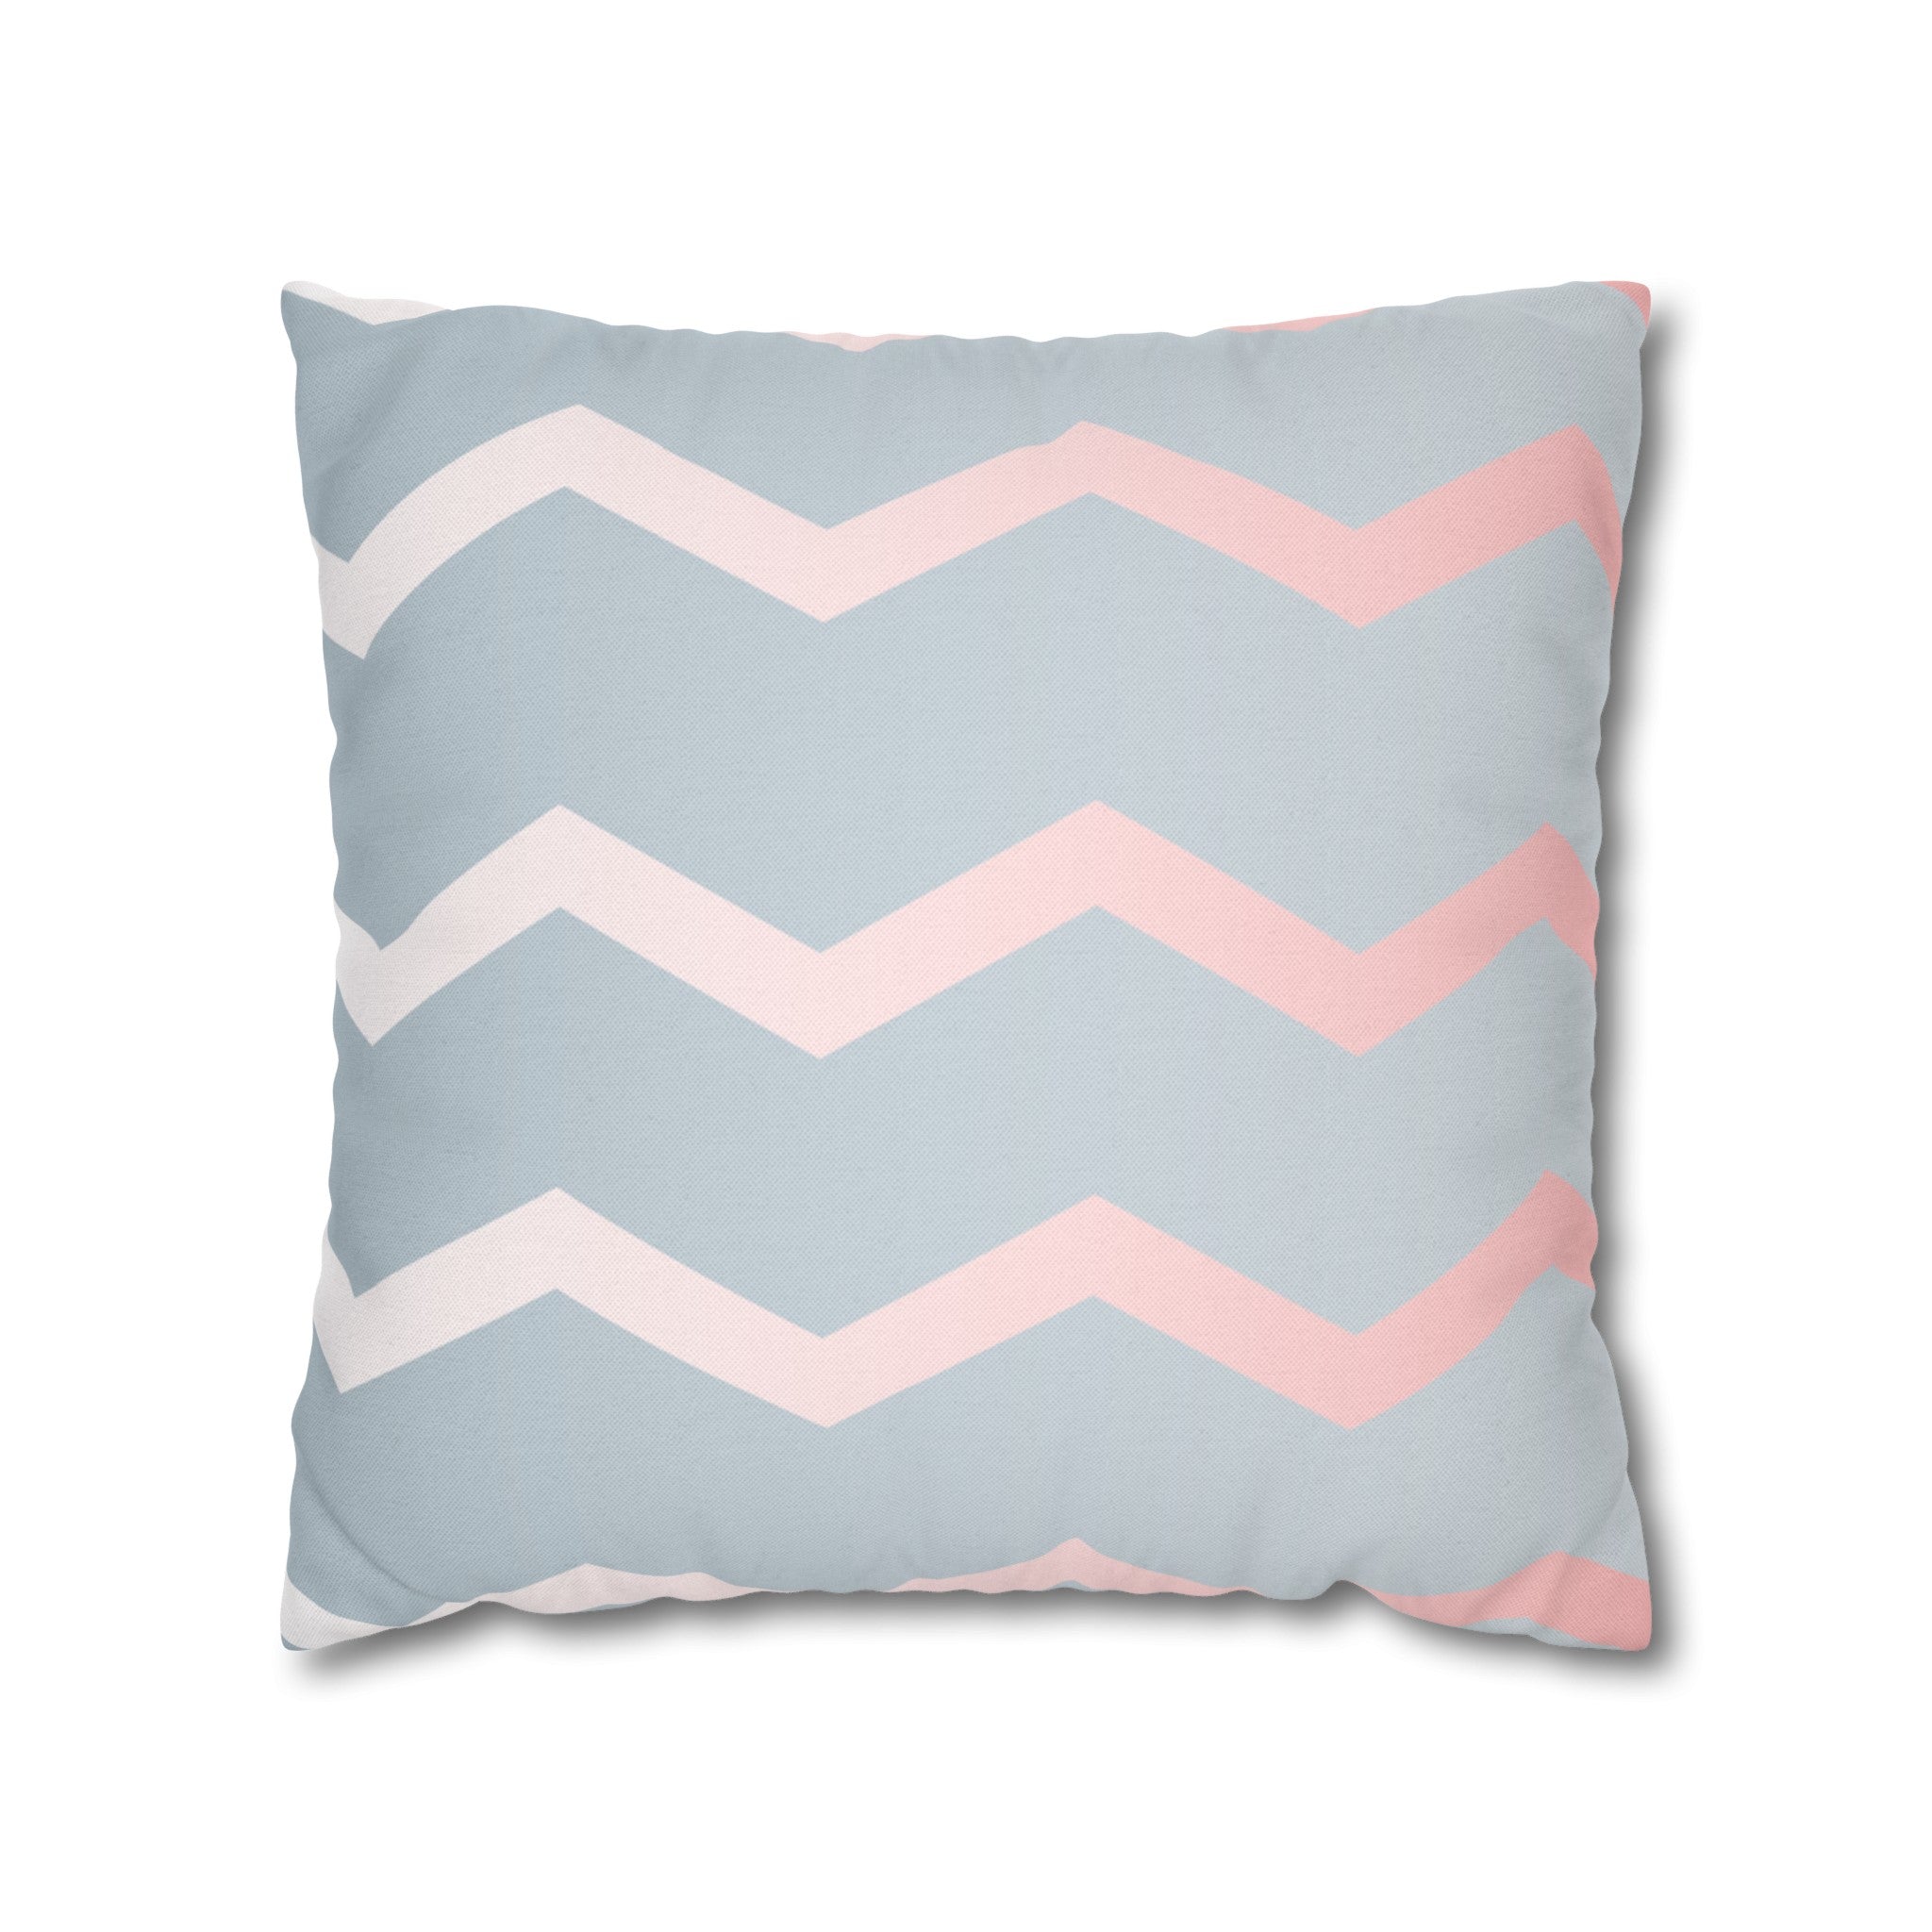 Grey and Pink Metallic Zig Zag Wave Pattern Square Pillow Case - Spun Polyester Square Pillow - Home Decor - Couch Pillows